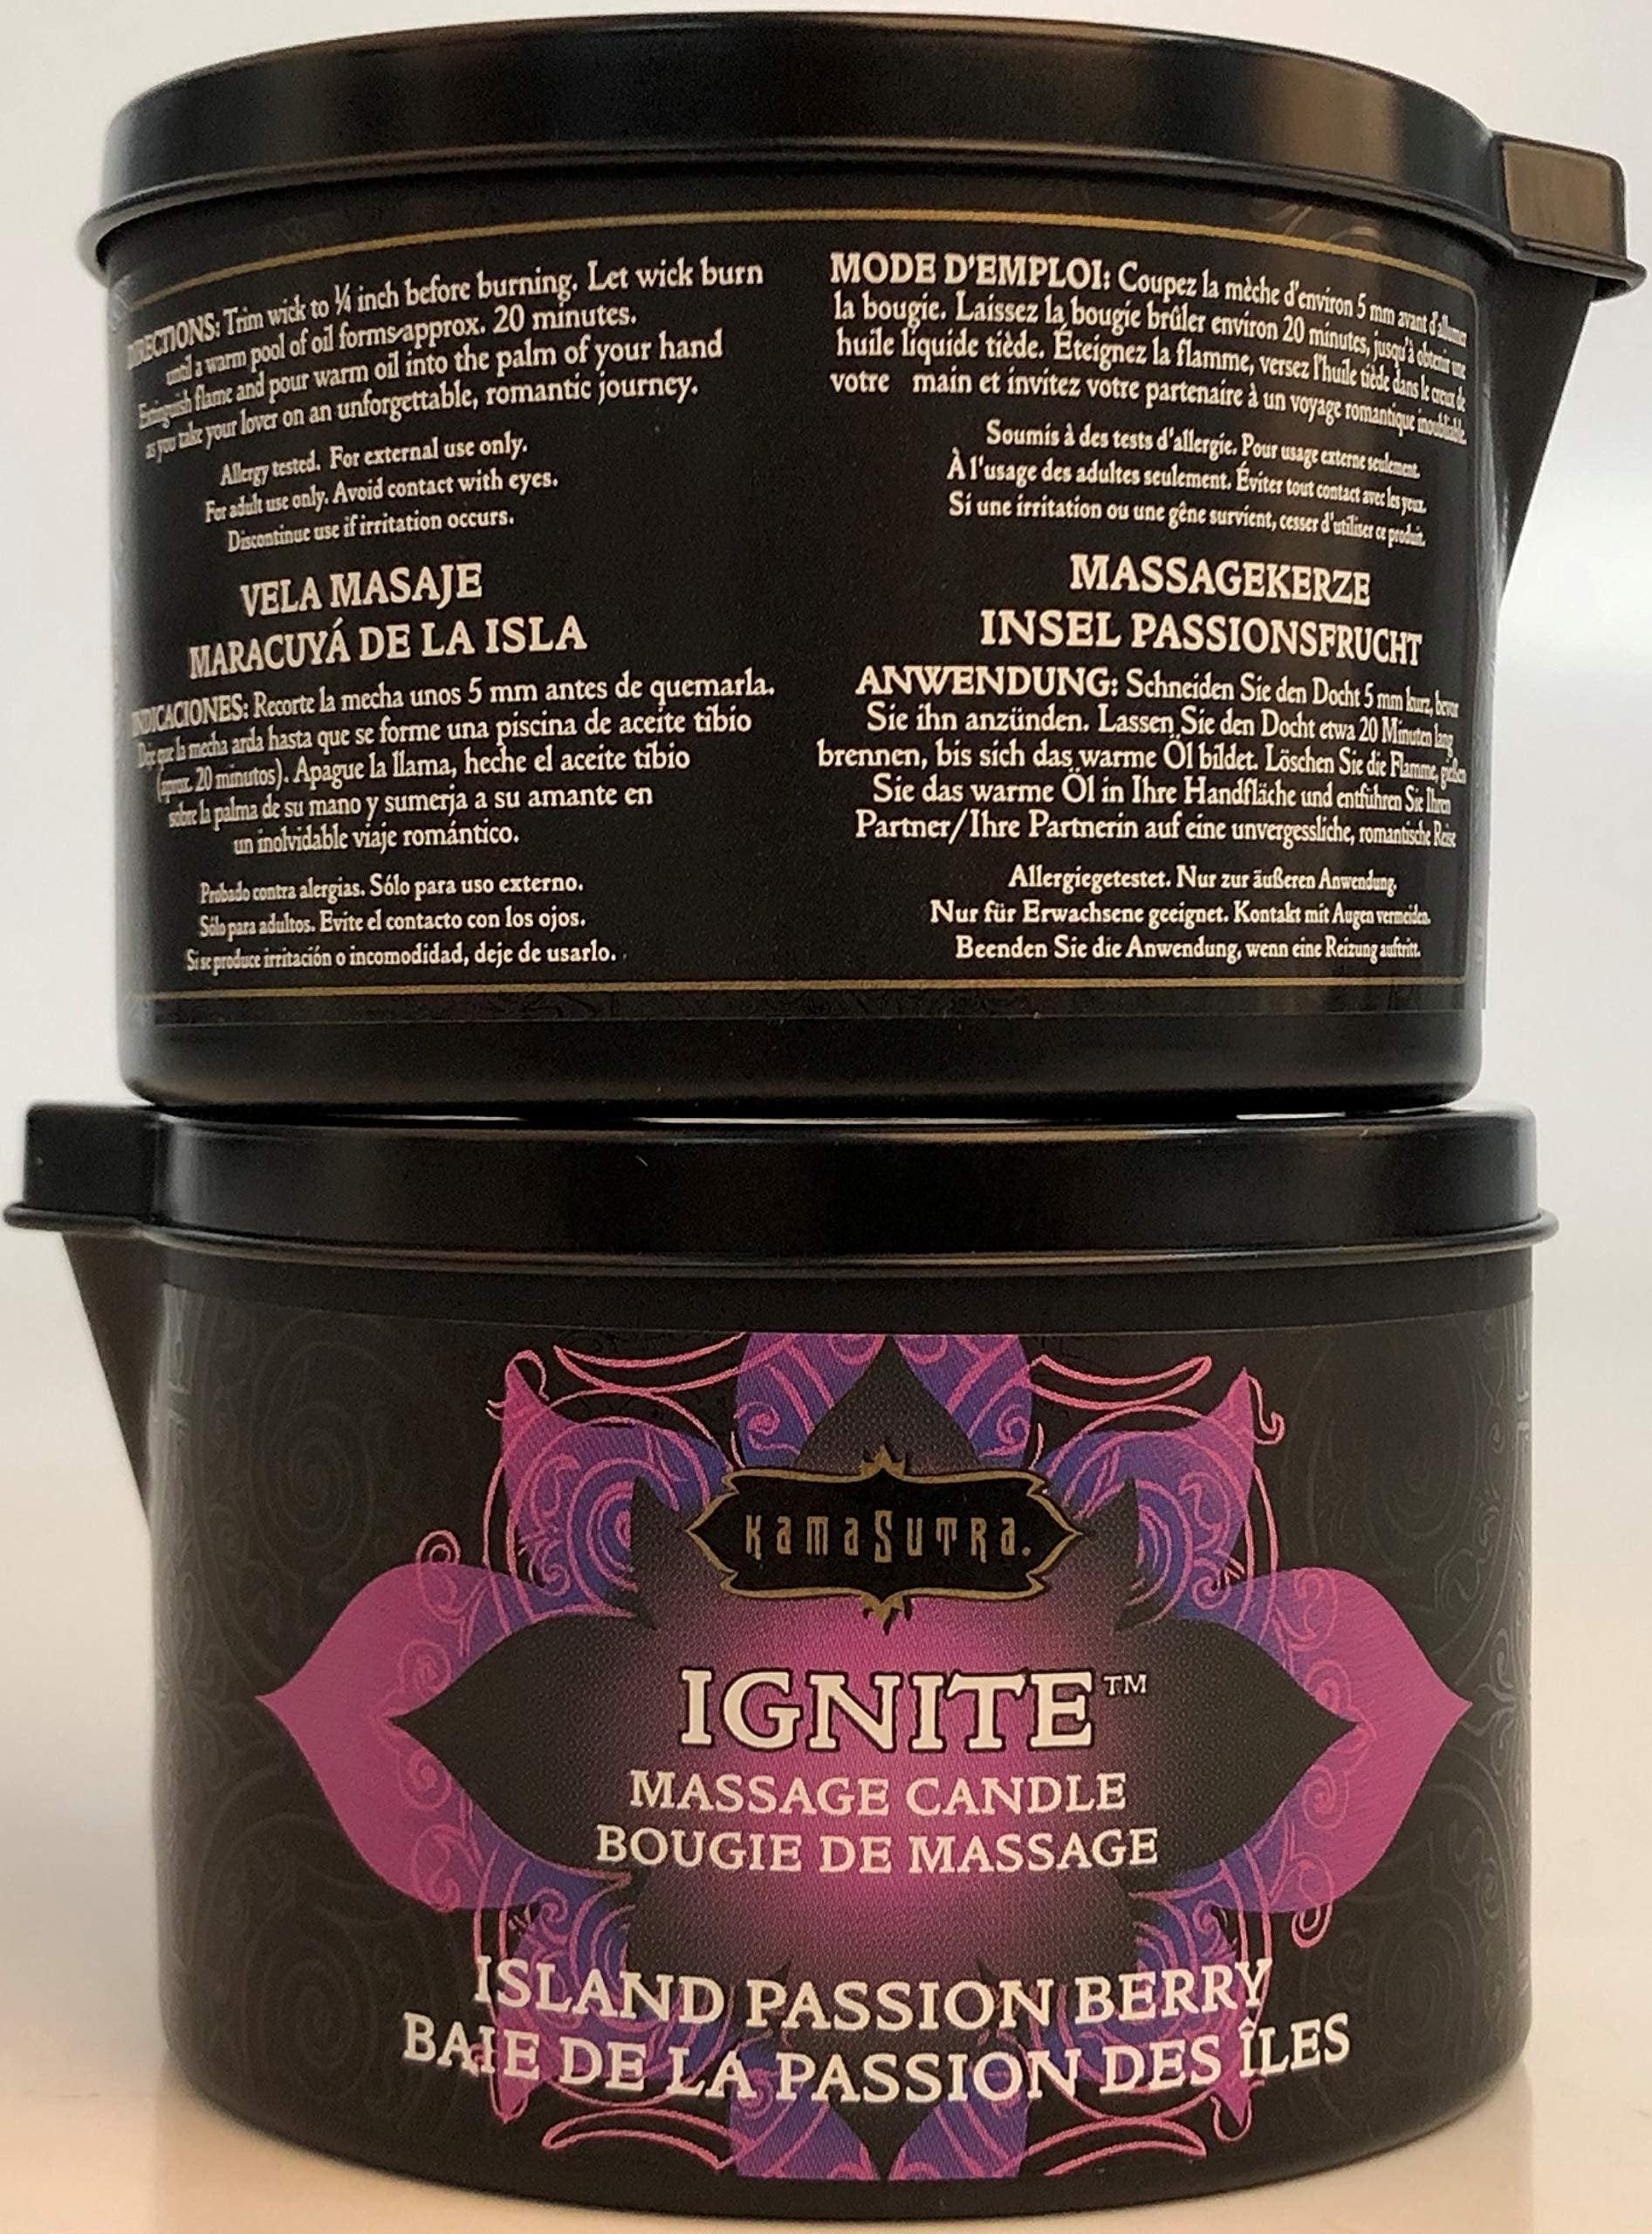 KAMA SUTRA Ignite Massage Candle - Coconut Oil and Soy Based - Island Passion Berry, 6 oz Candle Melts into a Warm Massage Oil, Couples Massage, Pour Spout Massage Candle